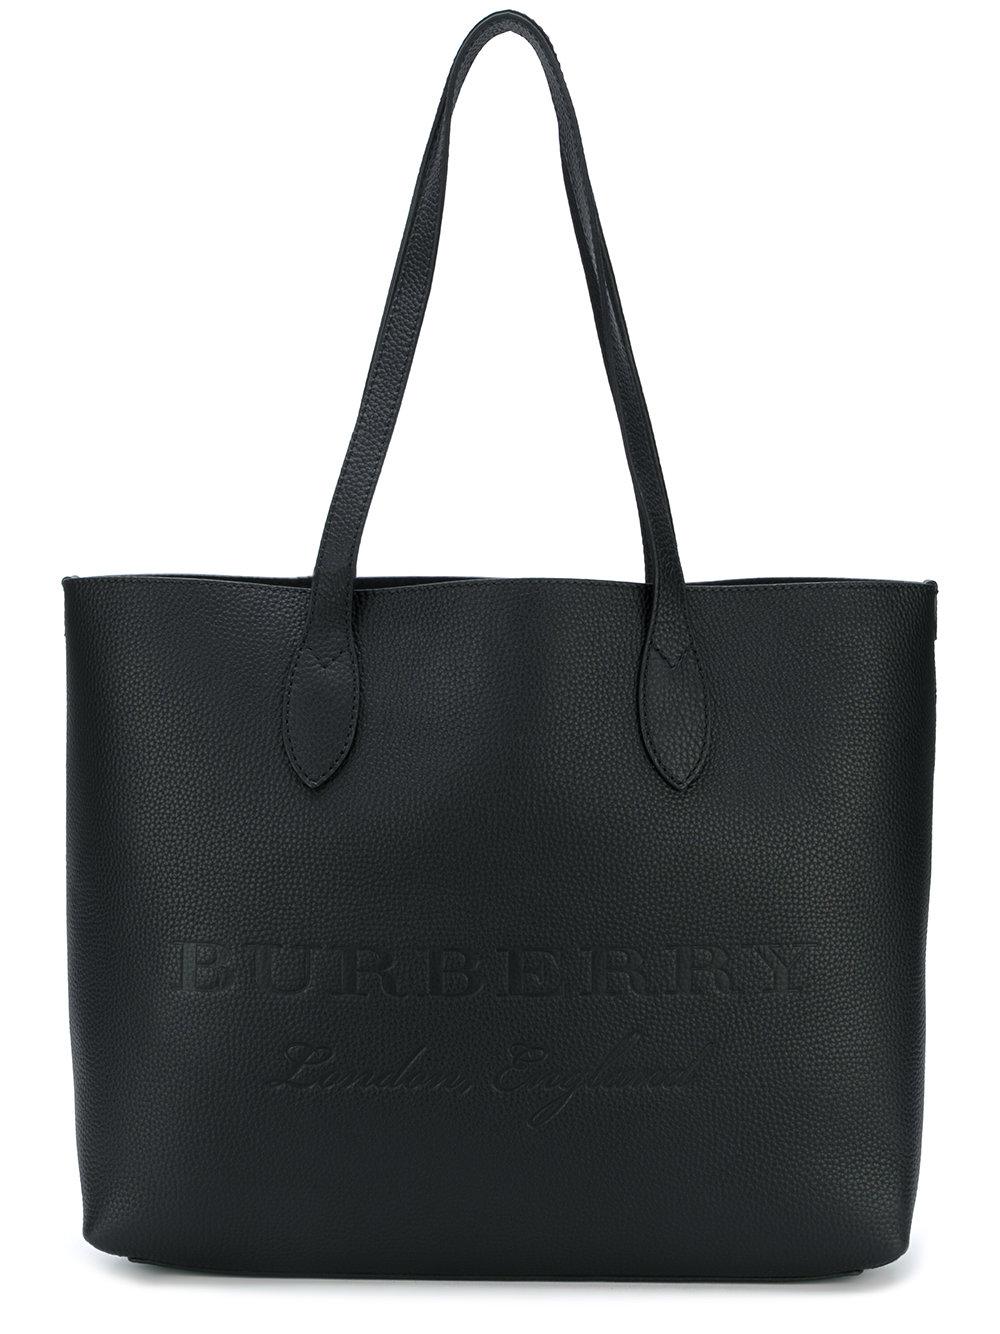 Burberry Remington Large Leather Tote Bag in Black - Lyst